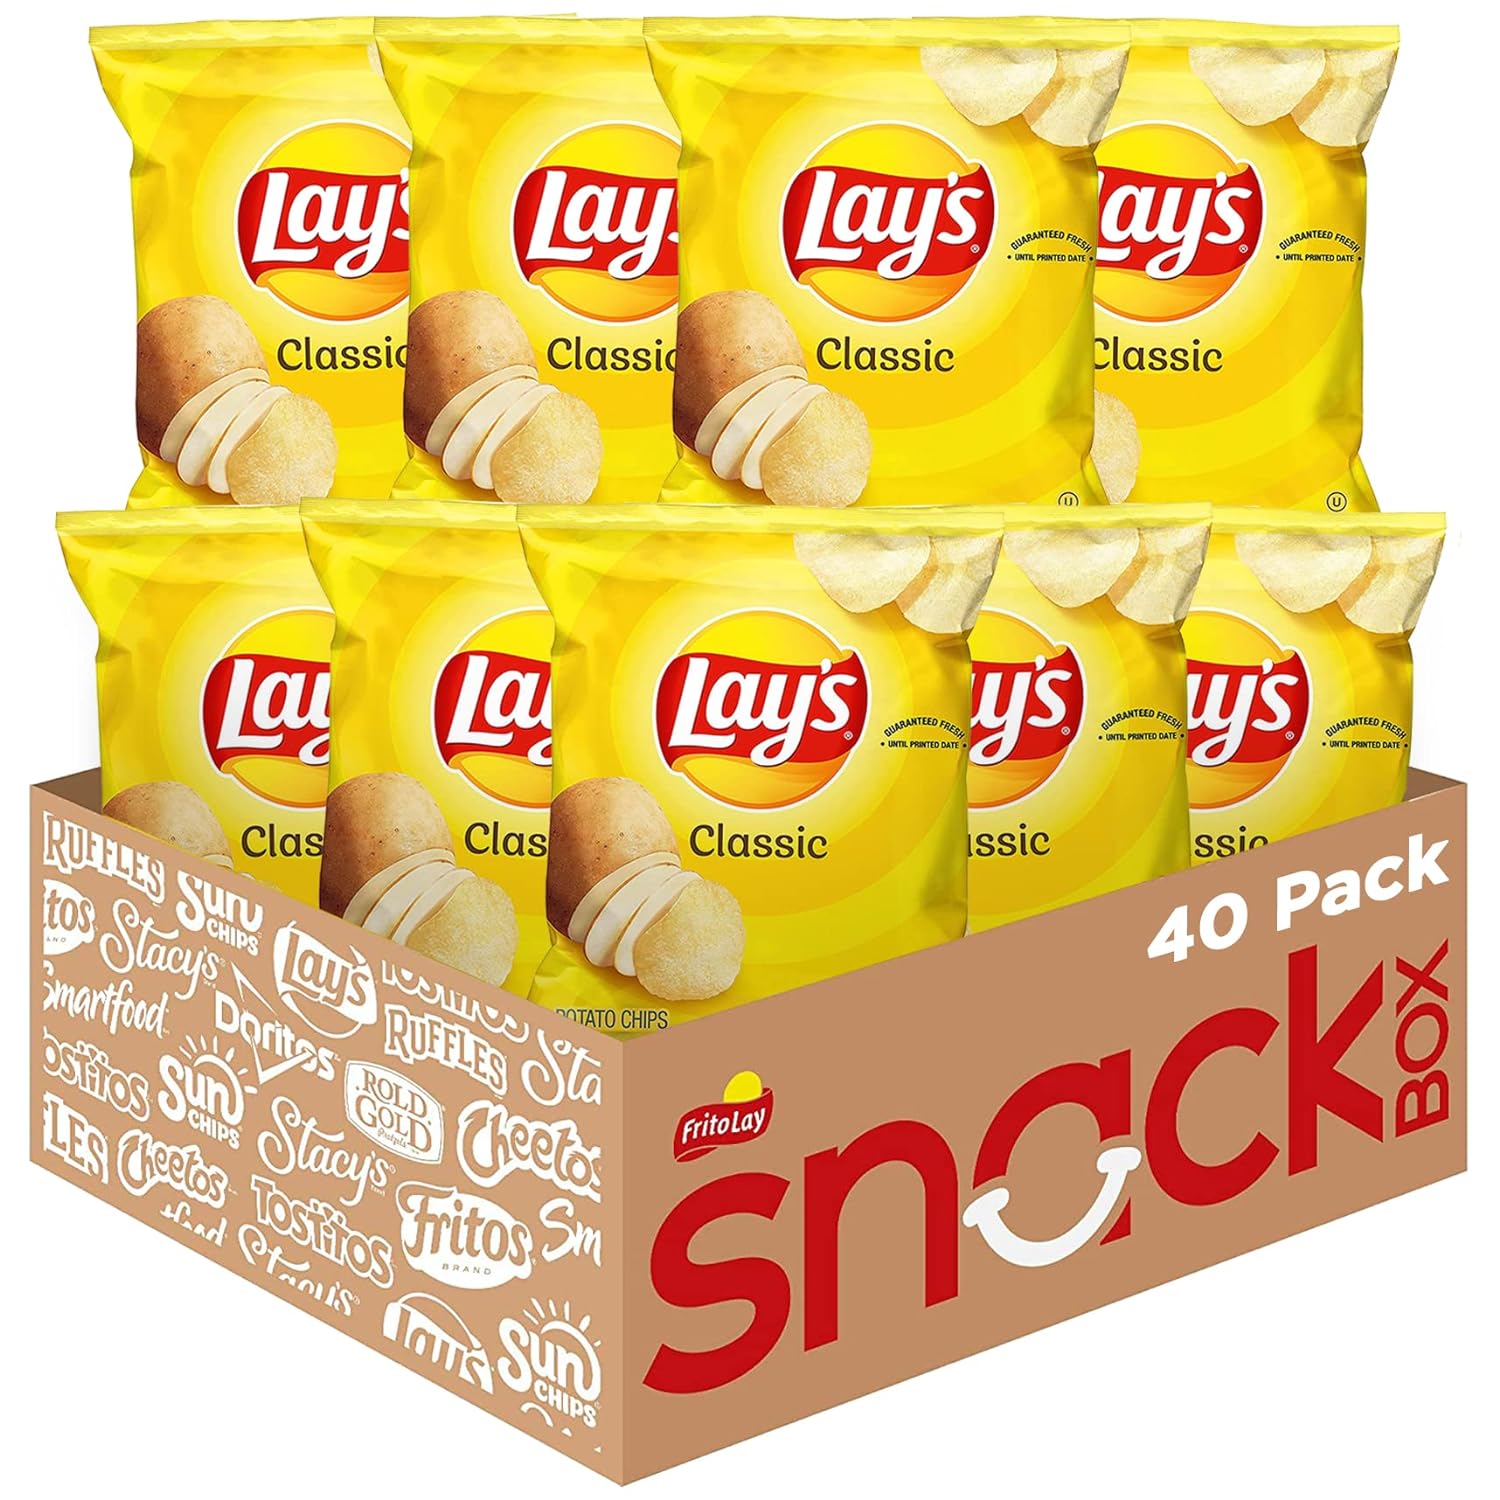 I buy these boxes of different flavor Lays chips & cheetoes often.  Have always been fresh, good value & keeps me from eating a whole bigger bag! Just the right serving with a sandwich